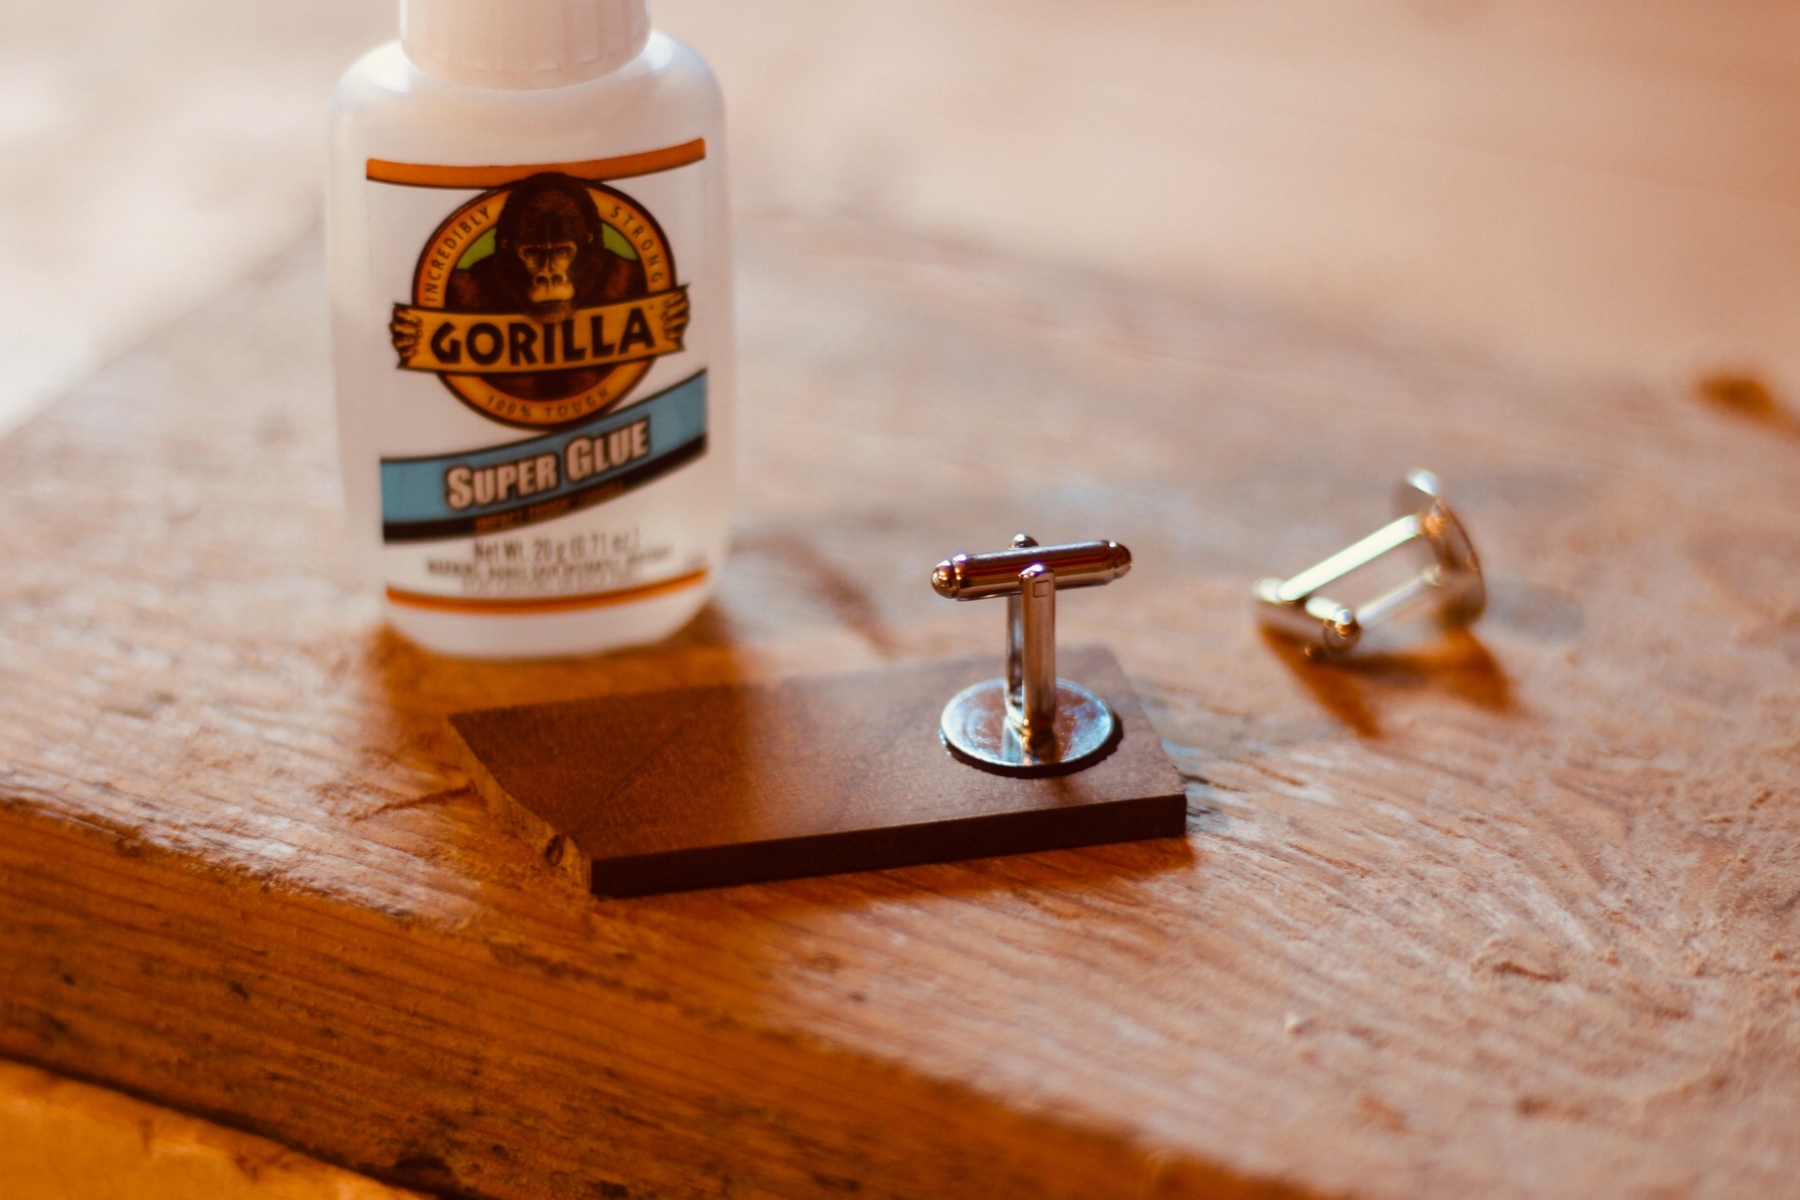 Wooden cufflinks and a container of super glue placed on a wooden surface